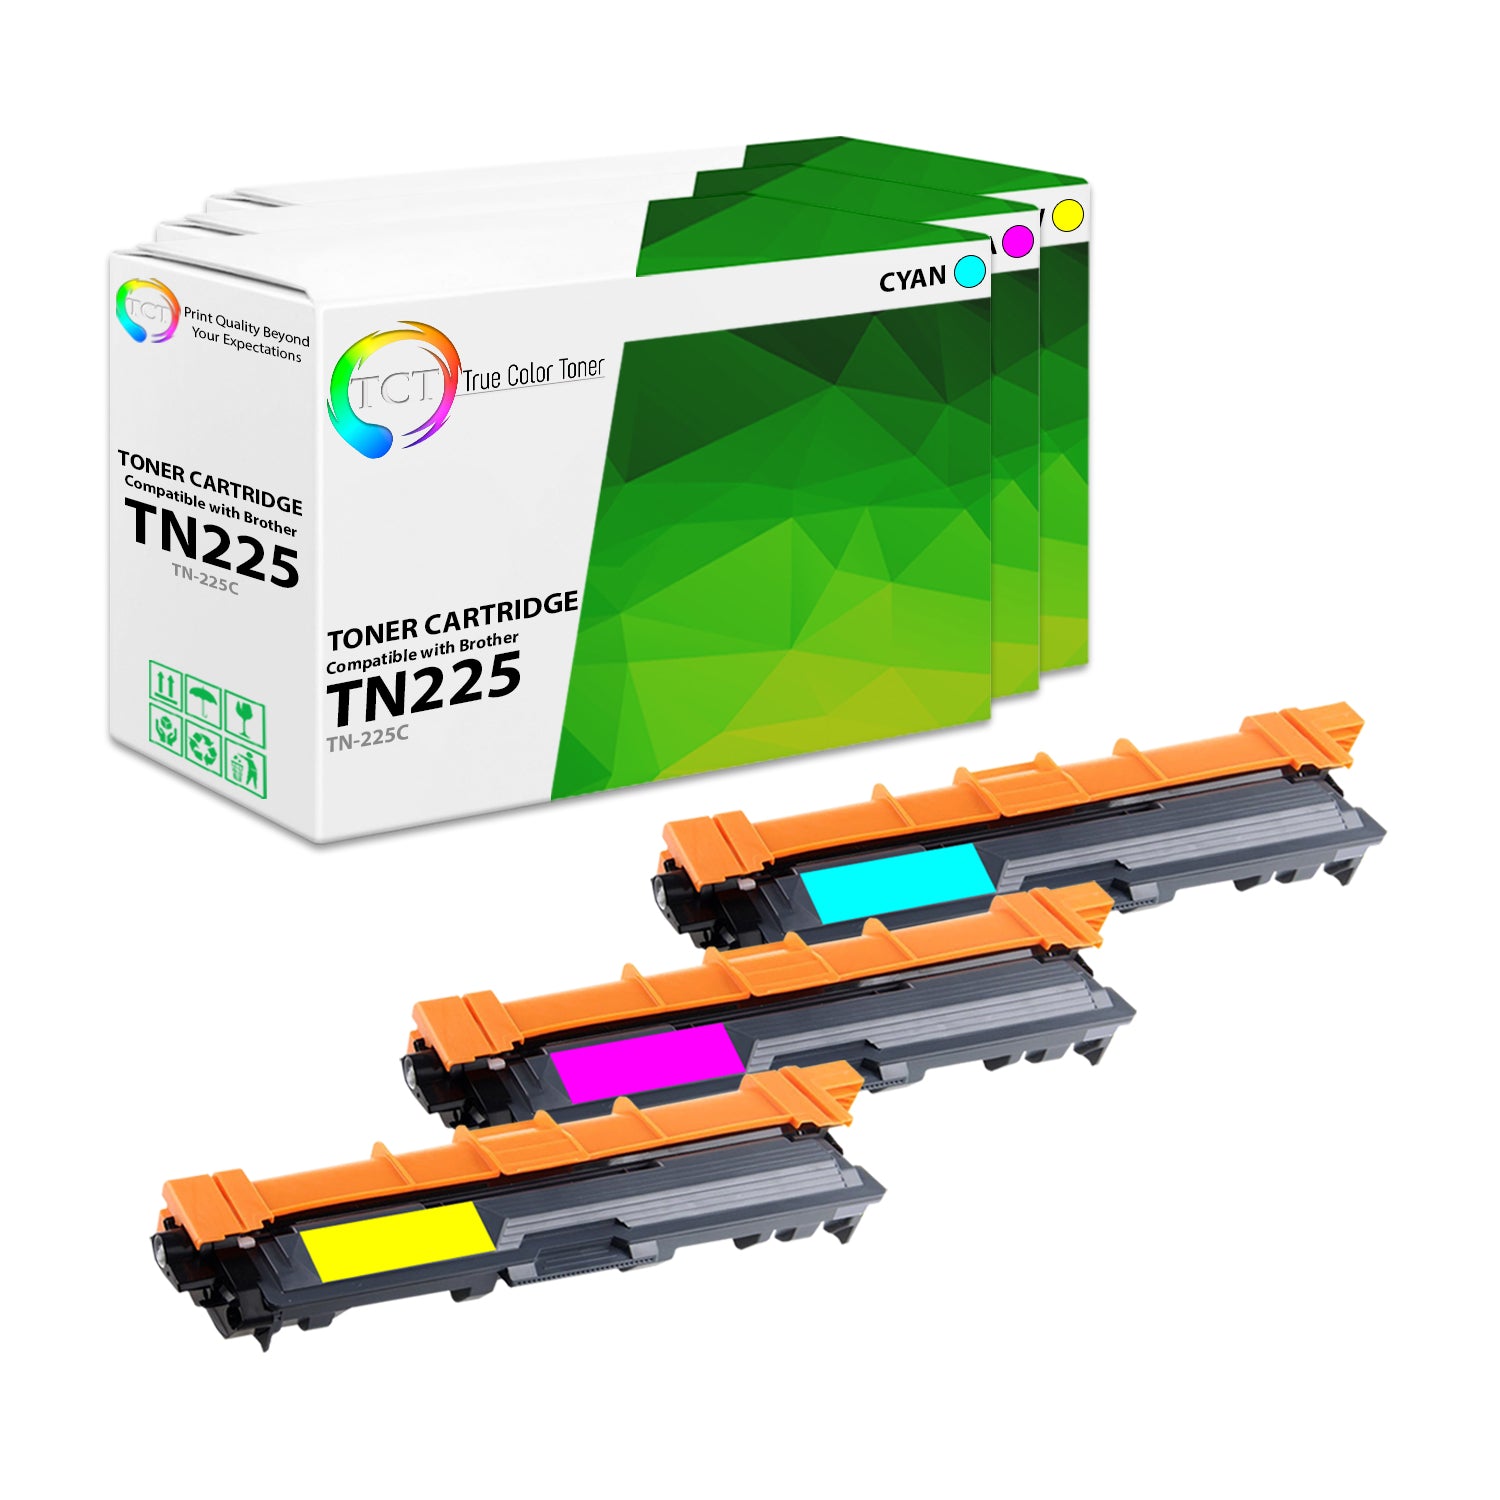 TCT Compatible HY Toner Cartridge Replacement for the Brother TN225 Series - 3 Pack (C, M, Y)